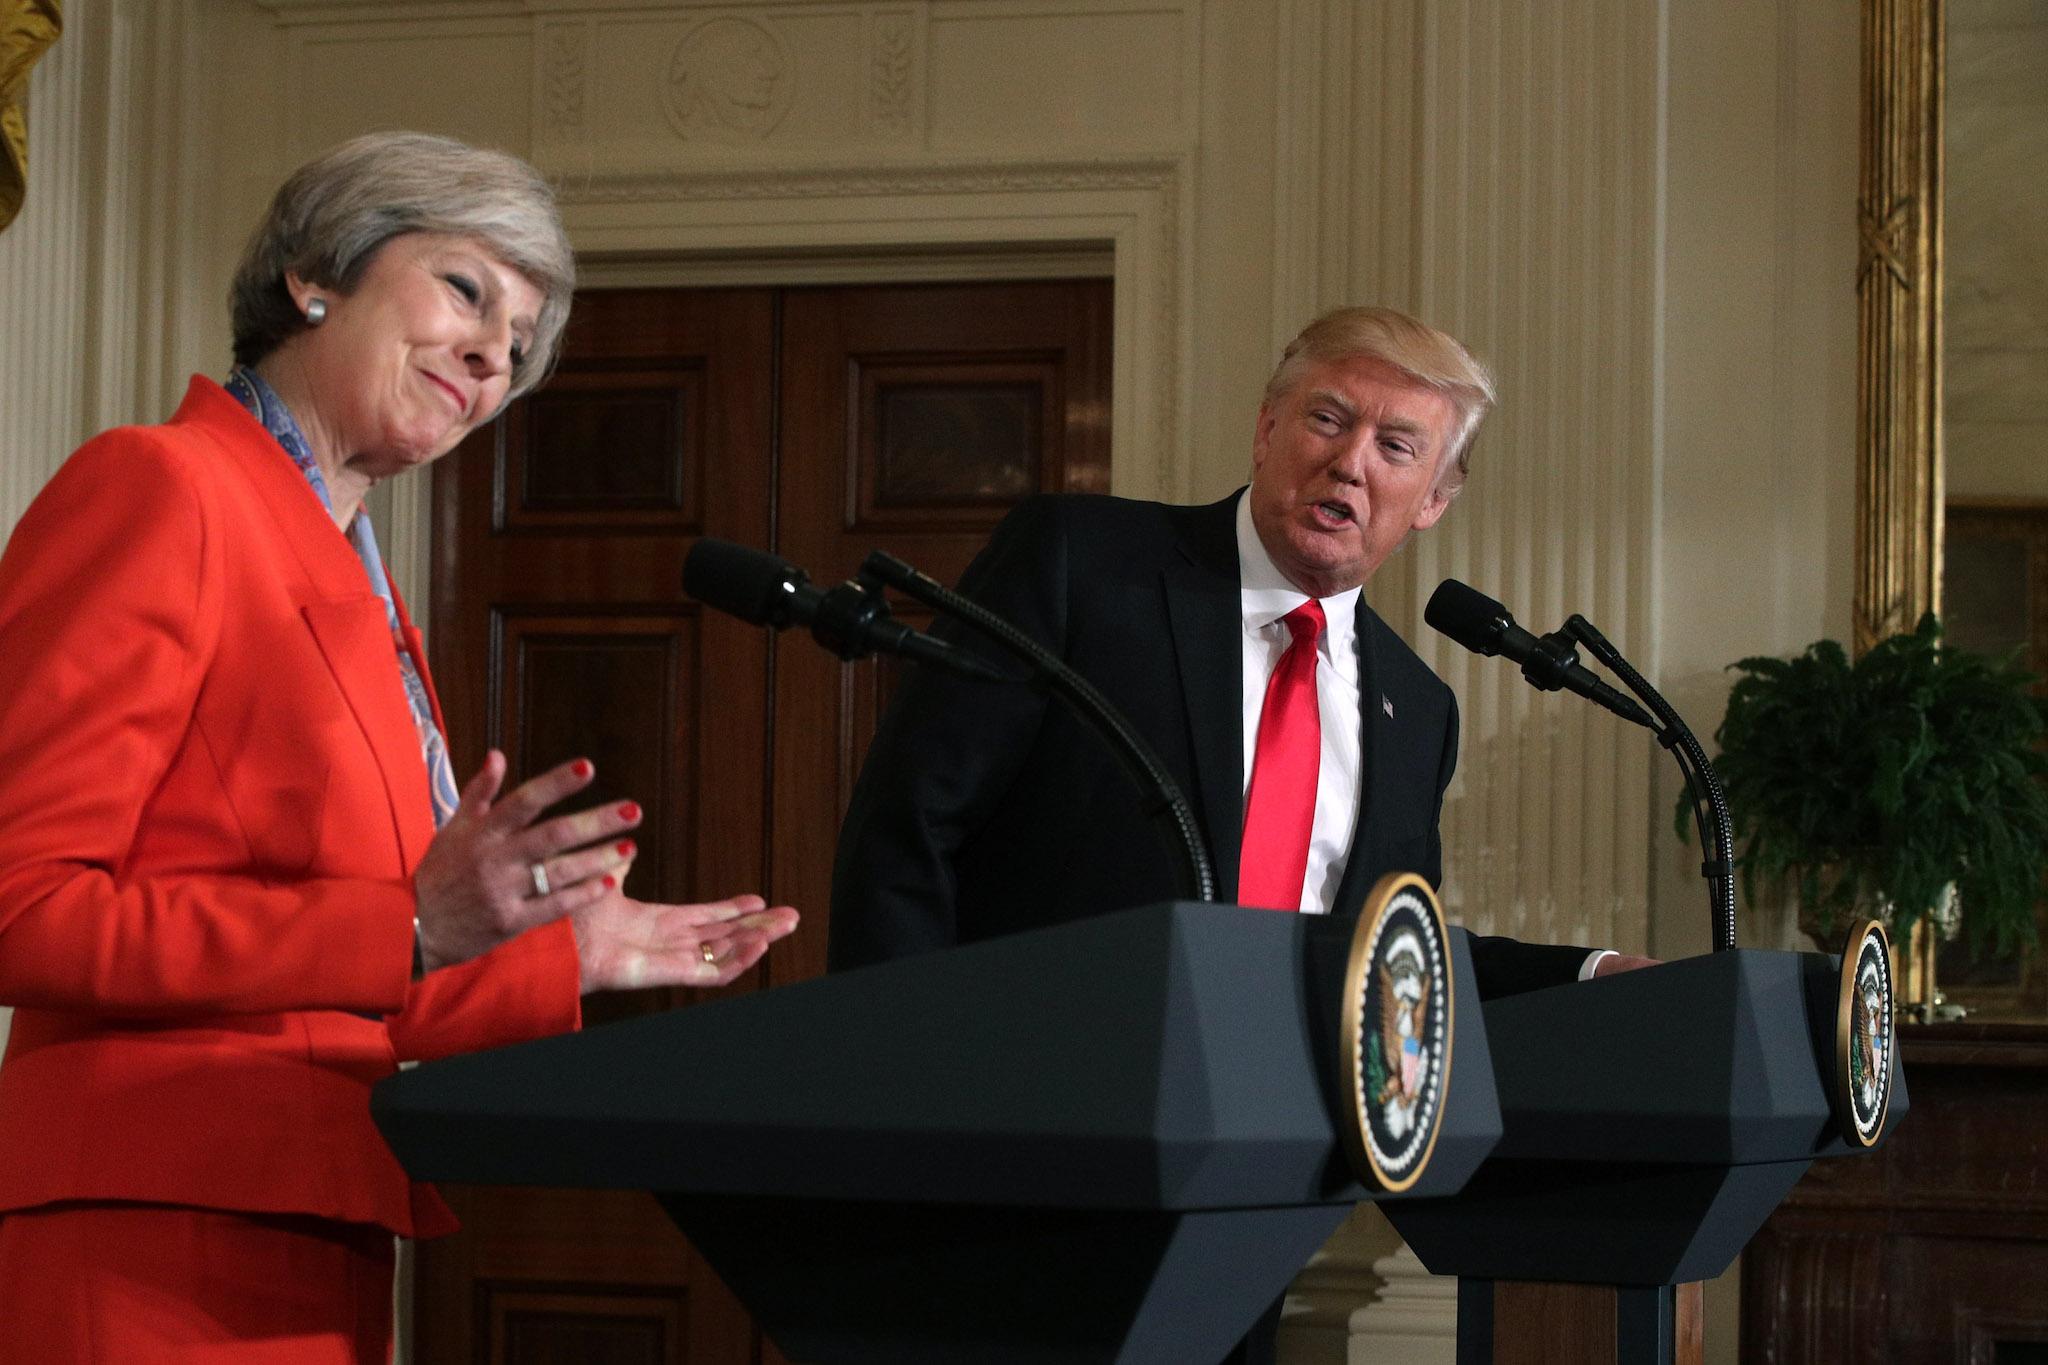 Theresa May was the first foreign leader to visit Trump at the White House